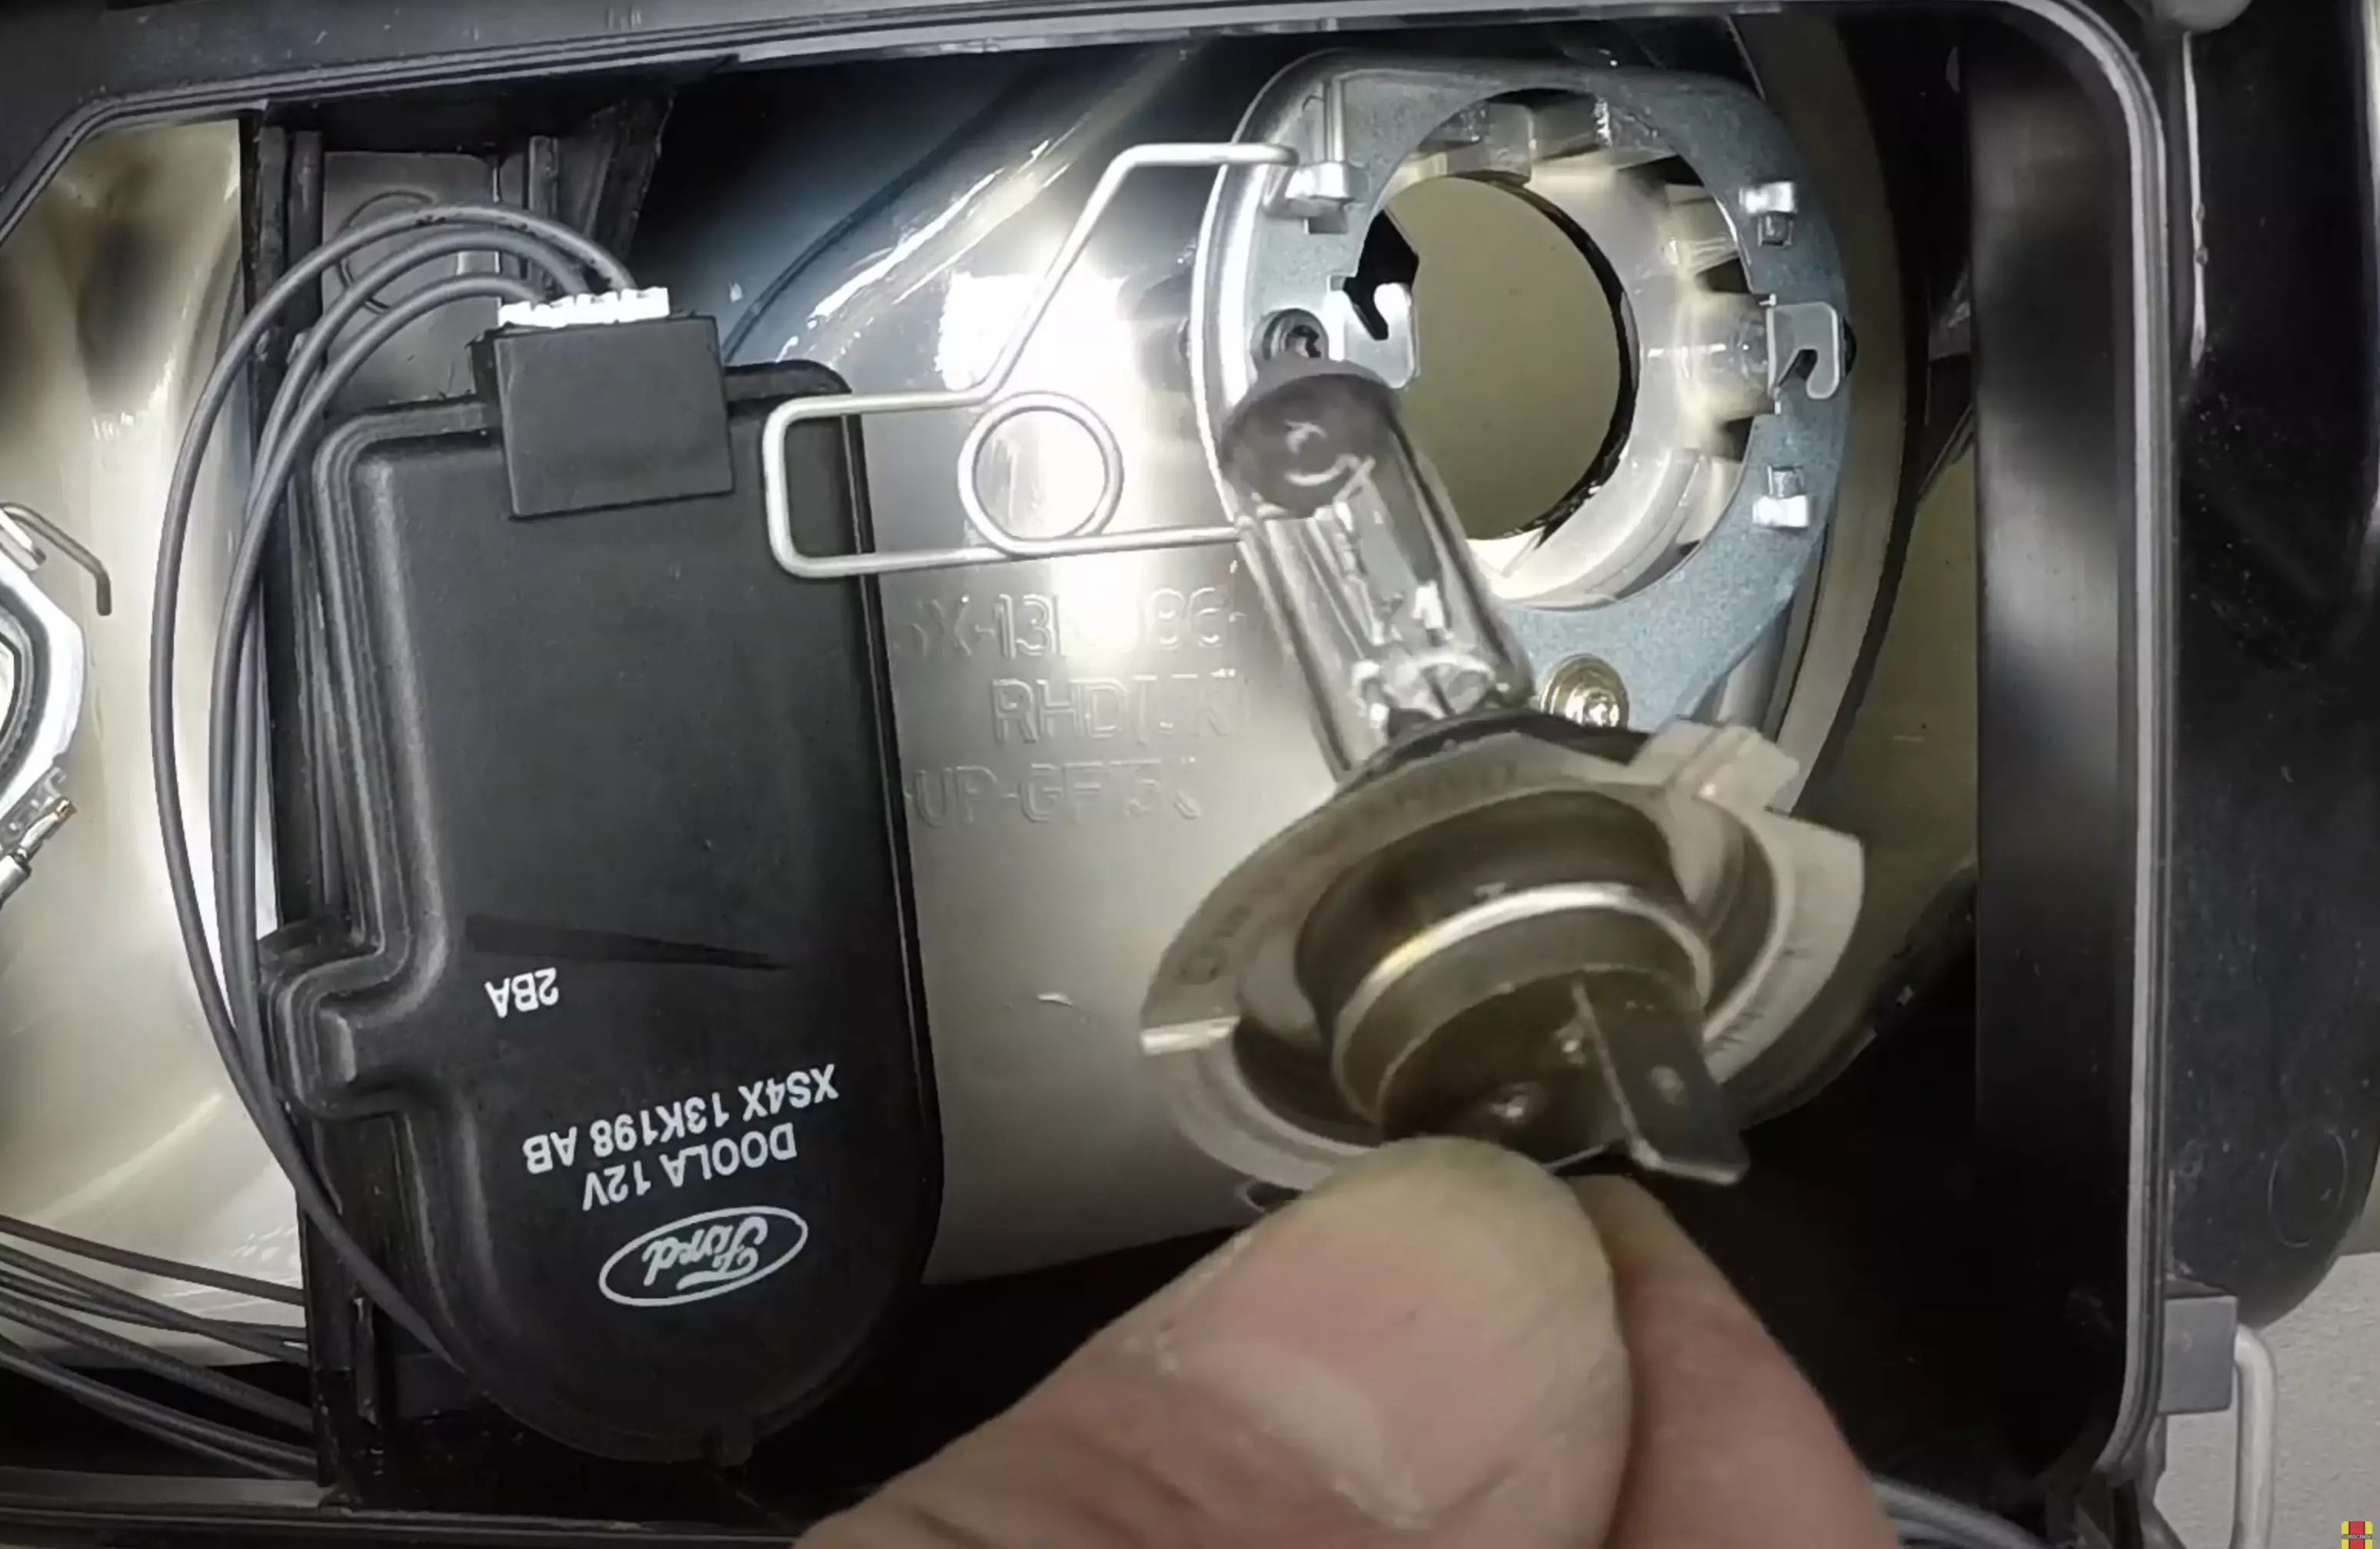 How To Install H1 LED Headlight - Aftermarket Halogen Bulb Replacement 